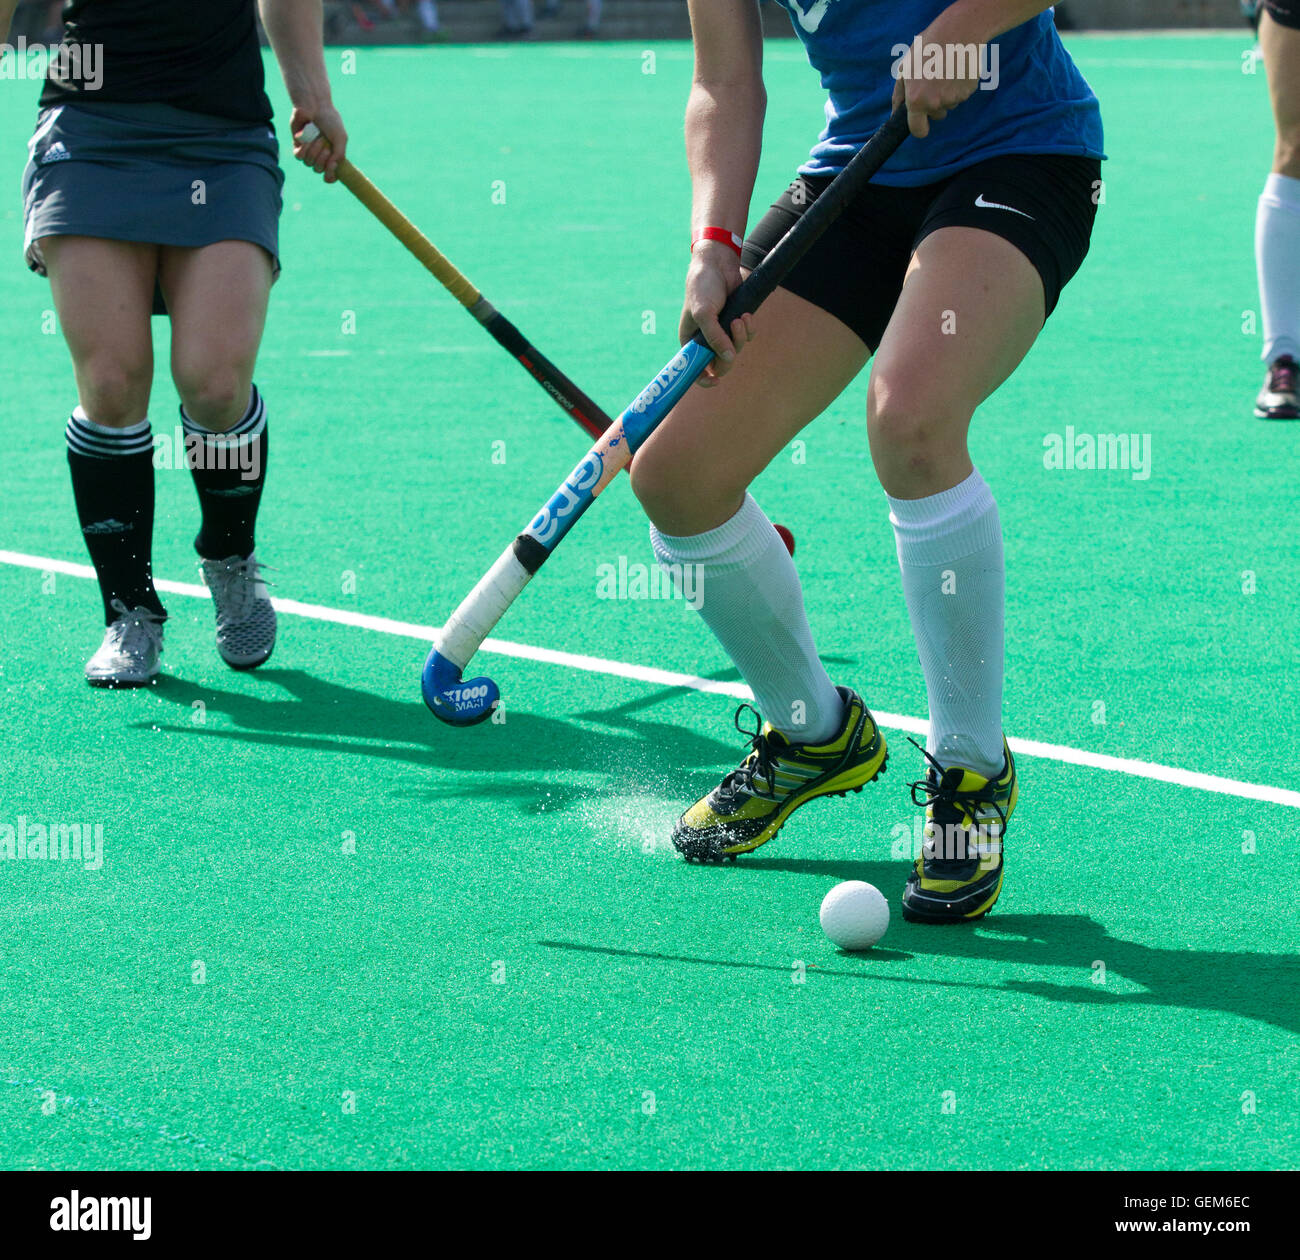 Two female field hockey players scramble for the ball Stock Photo